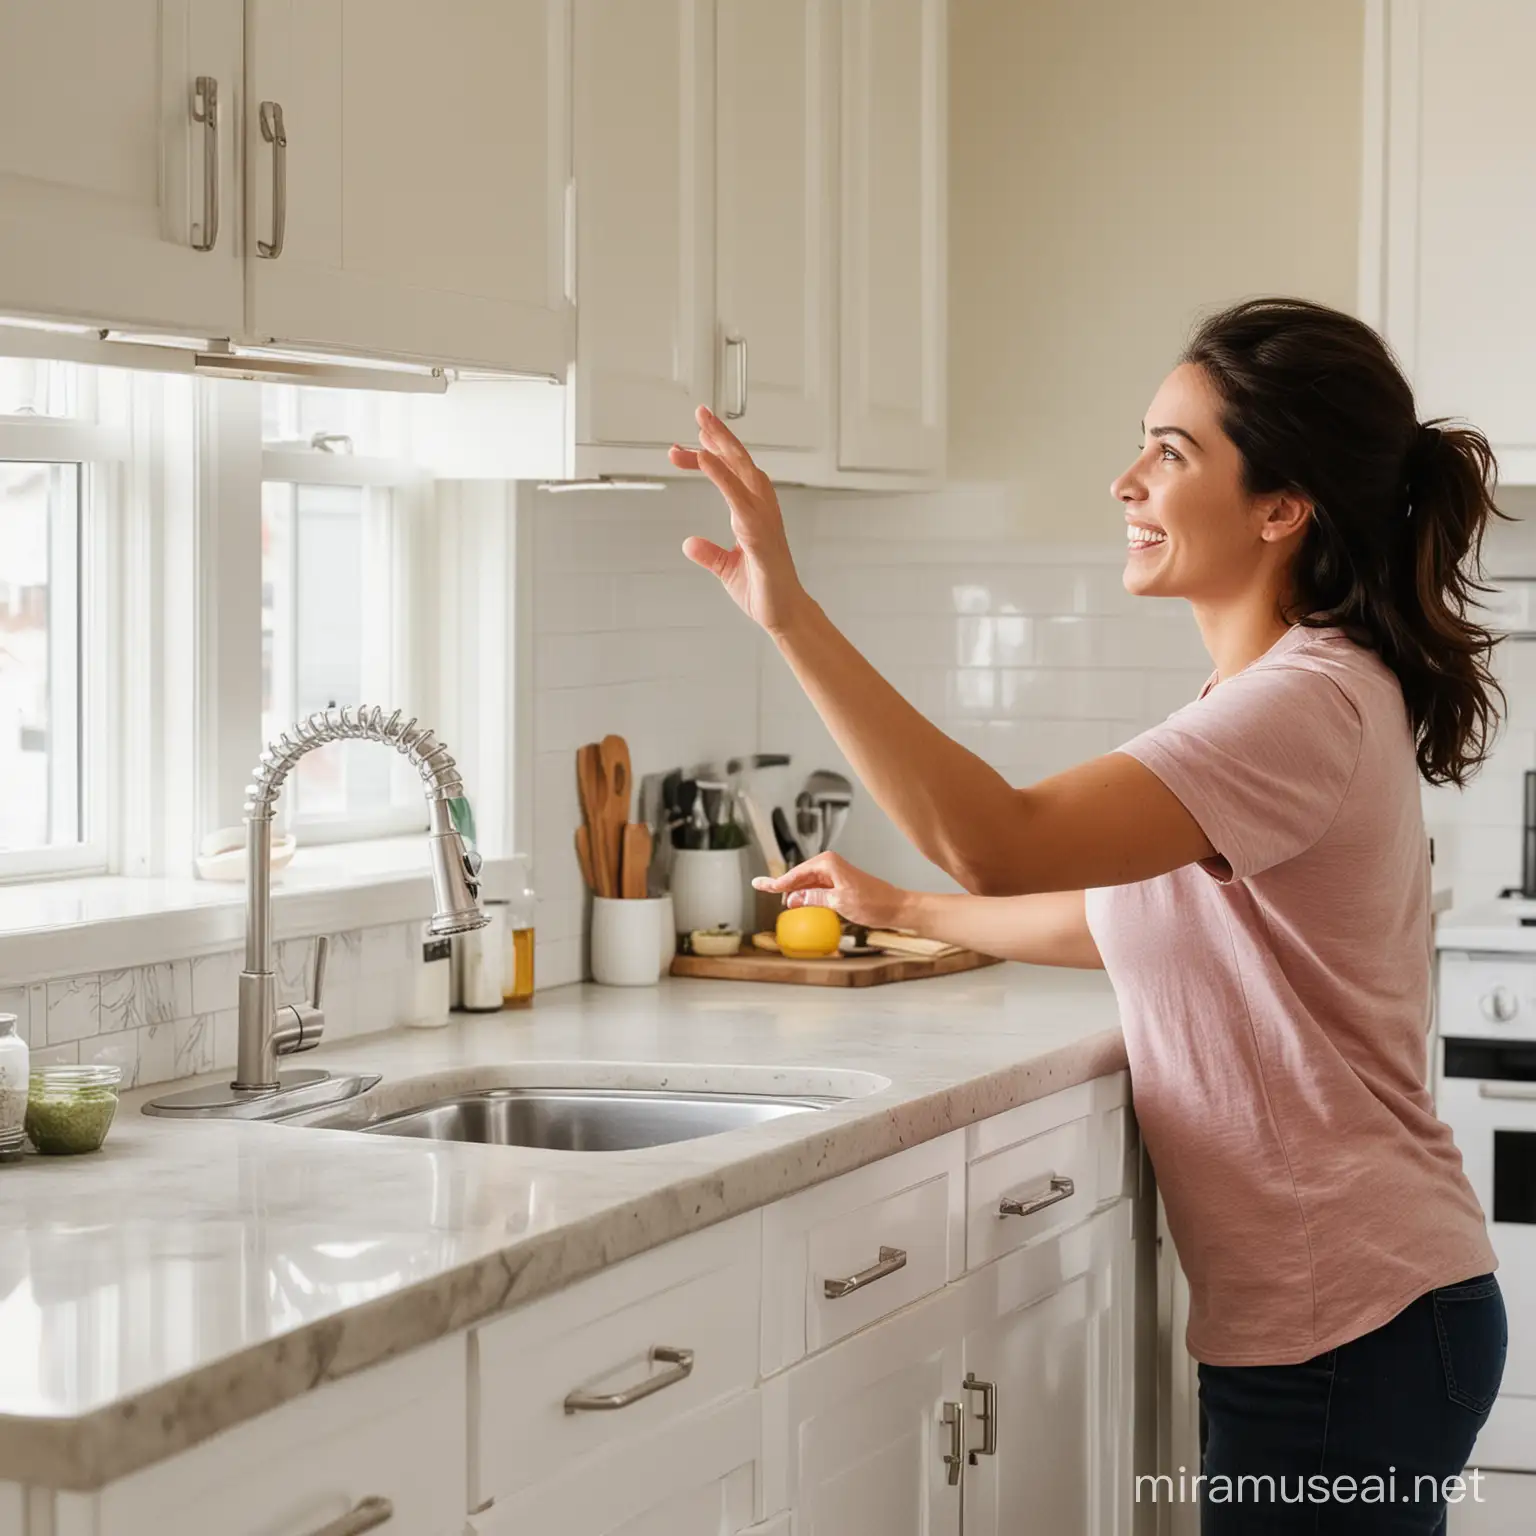 a woman reaching out to kitchen counter
